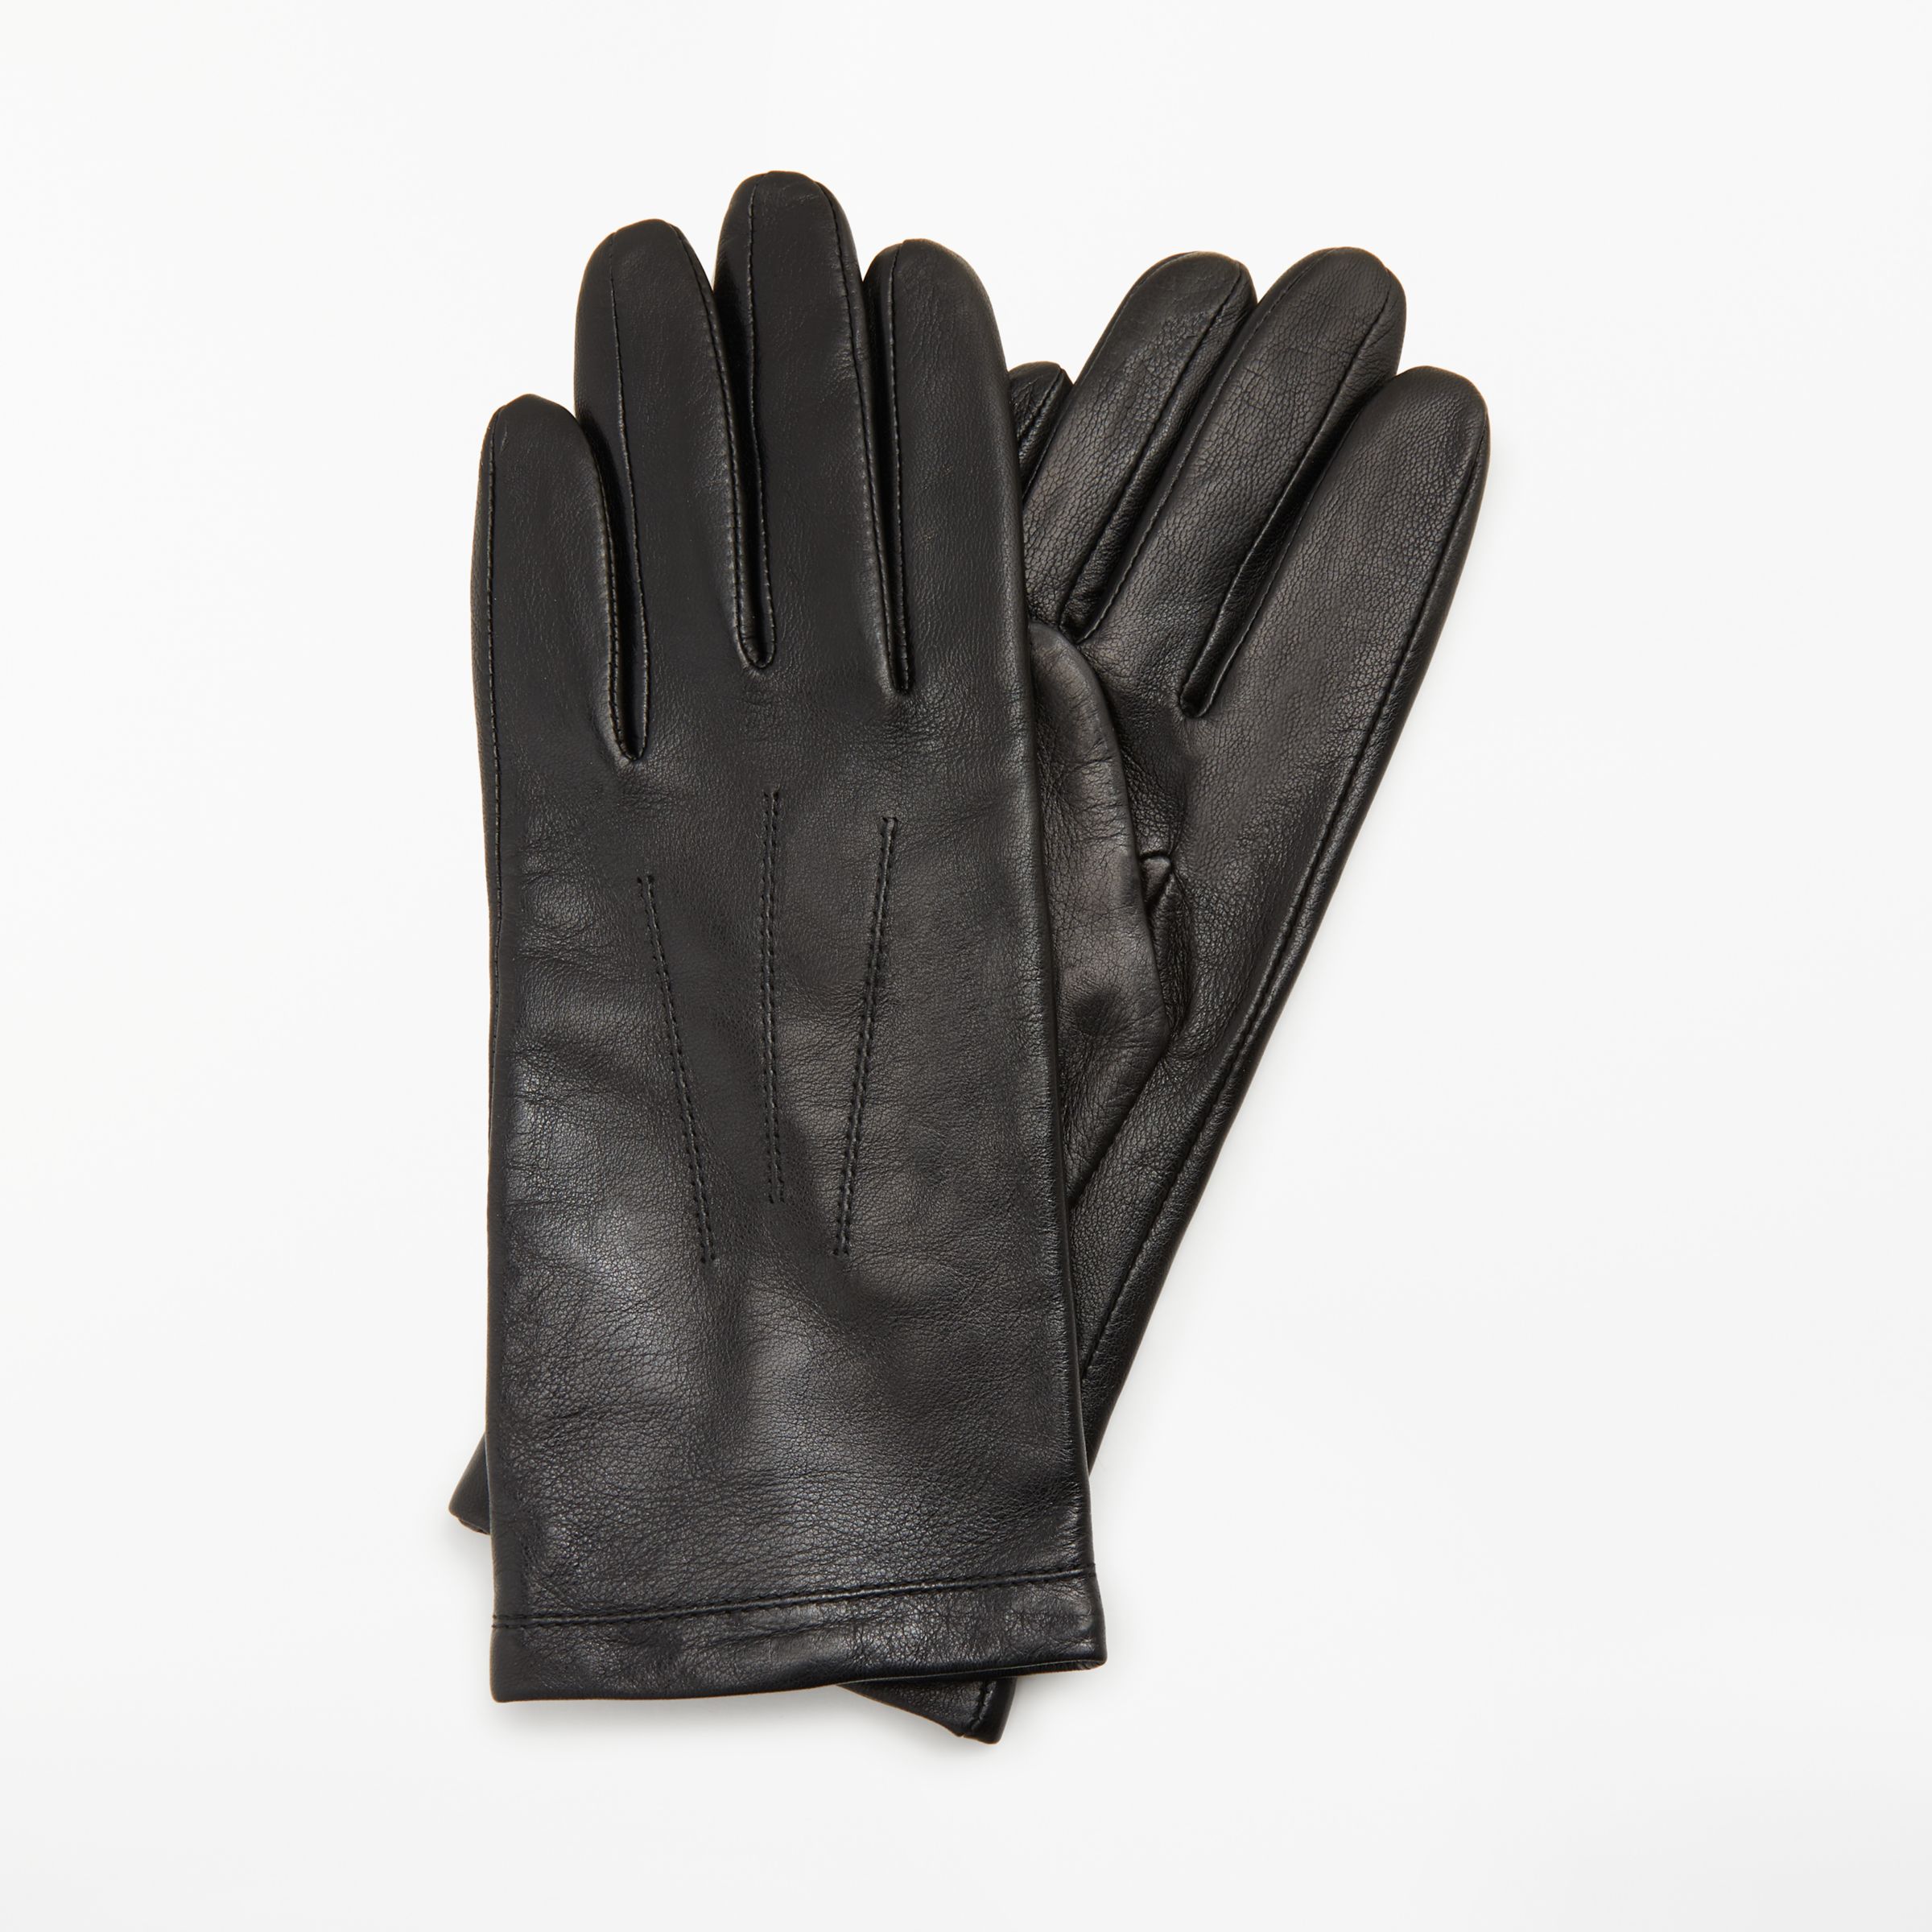 John Lewis & Partners Fleece Lined Leather Gloves at John Lewis & Partners